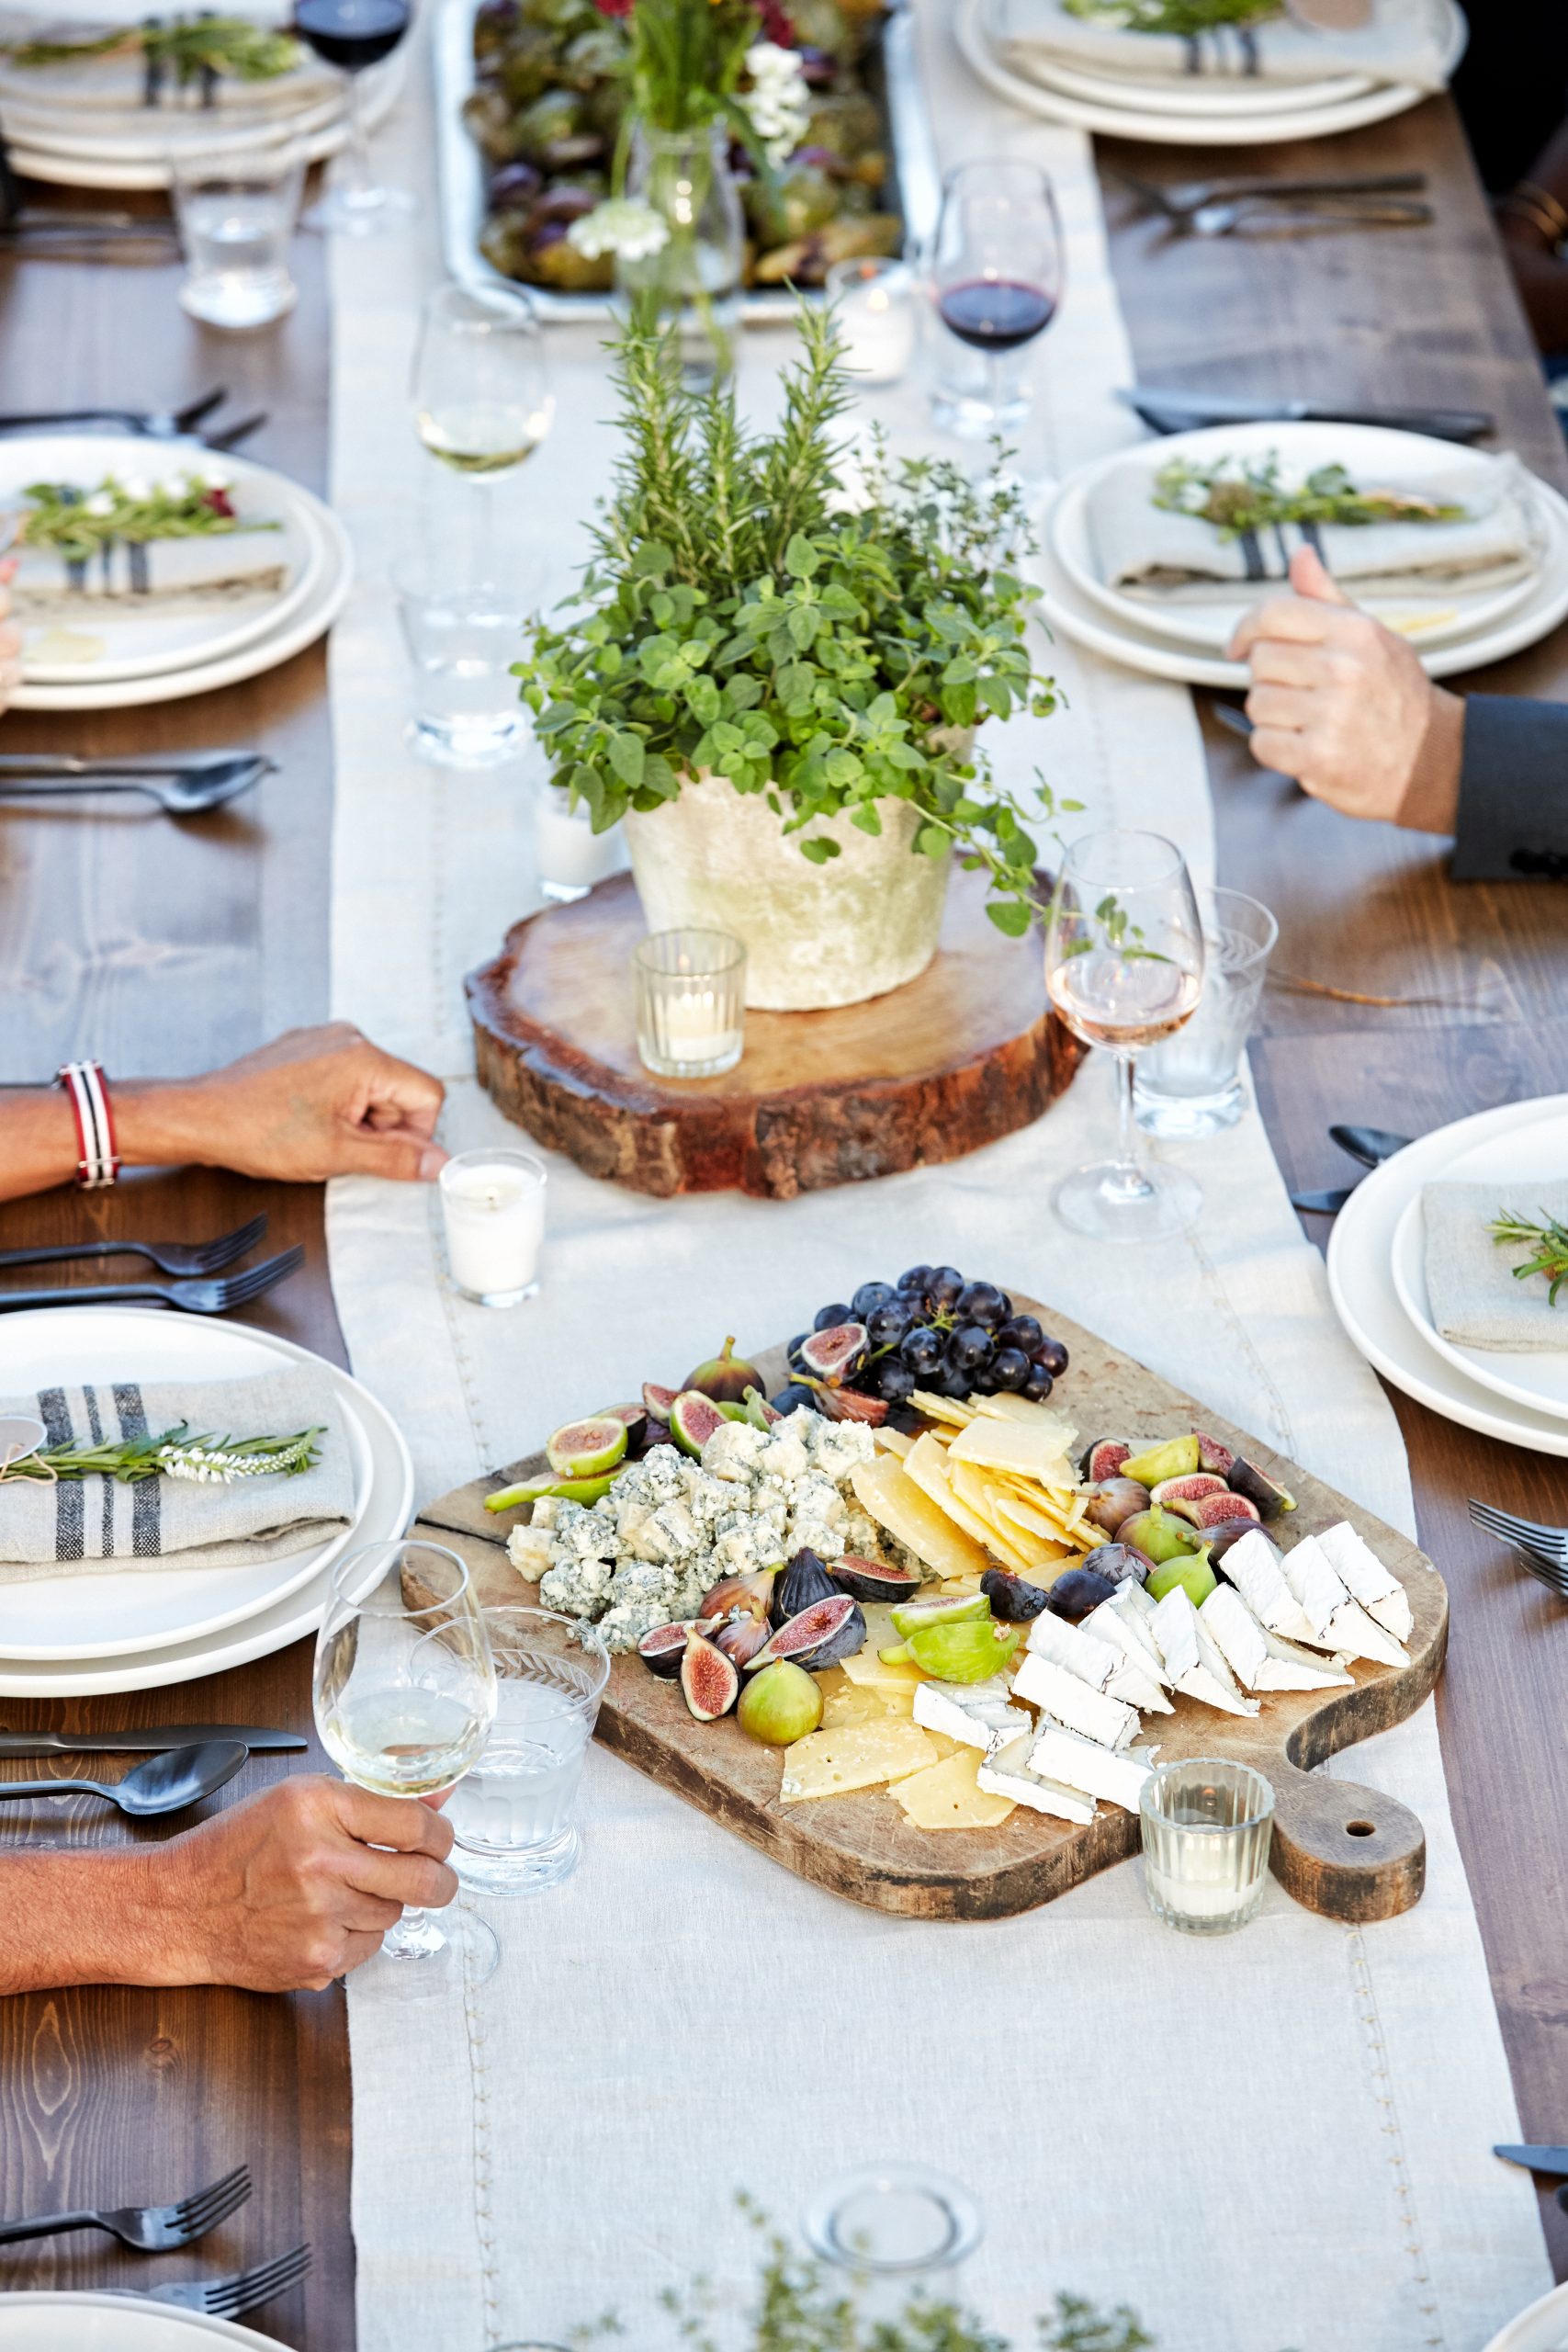 Cheese selection elegantly presented at a catered event by Nourish Culinary